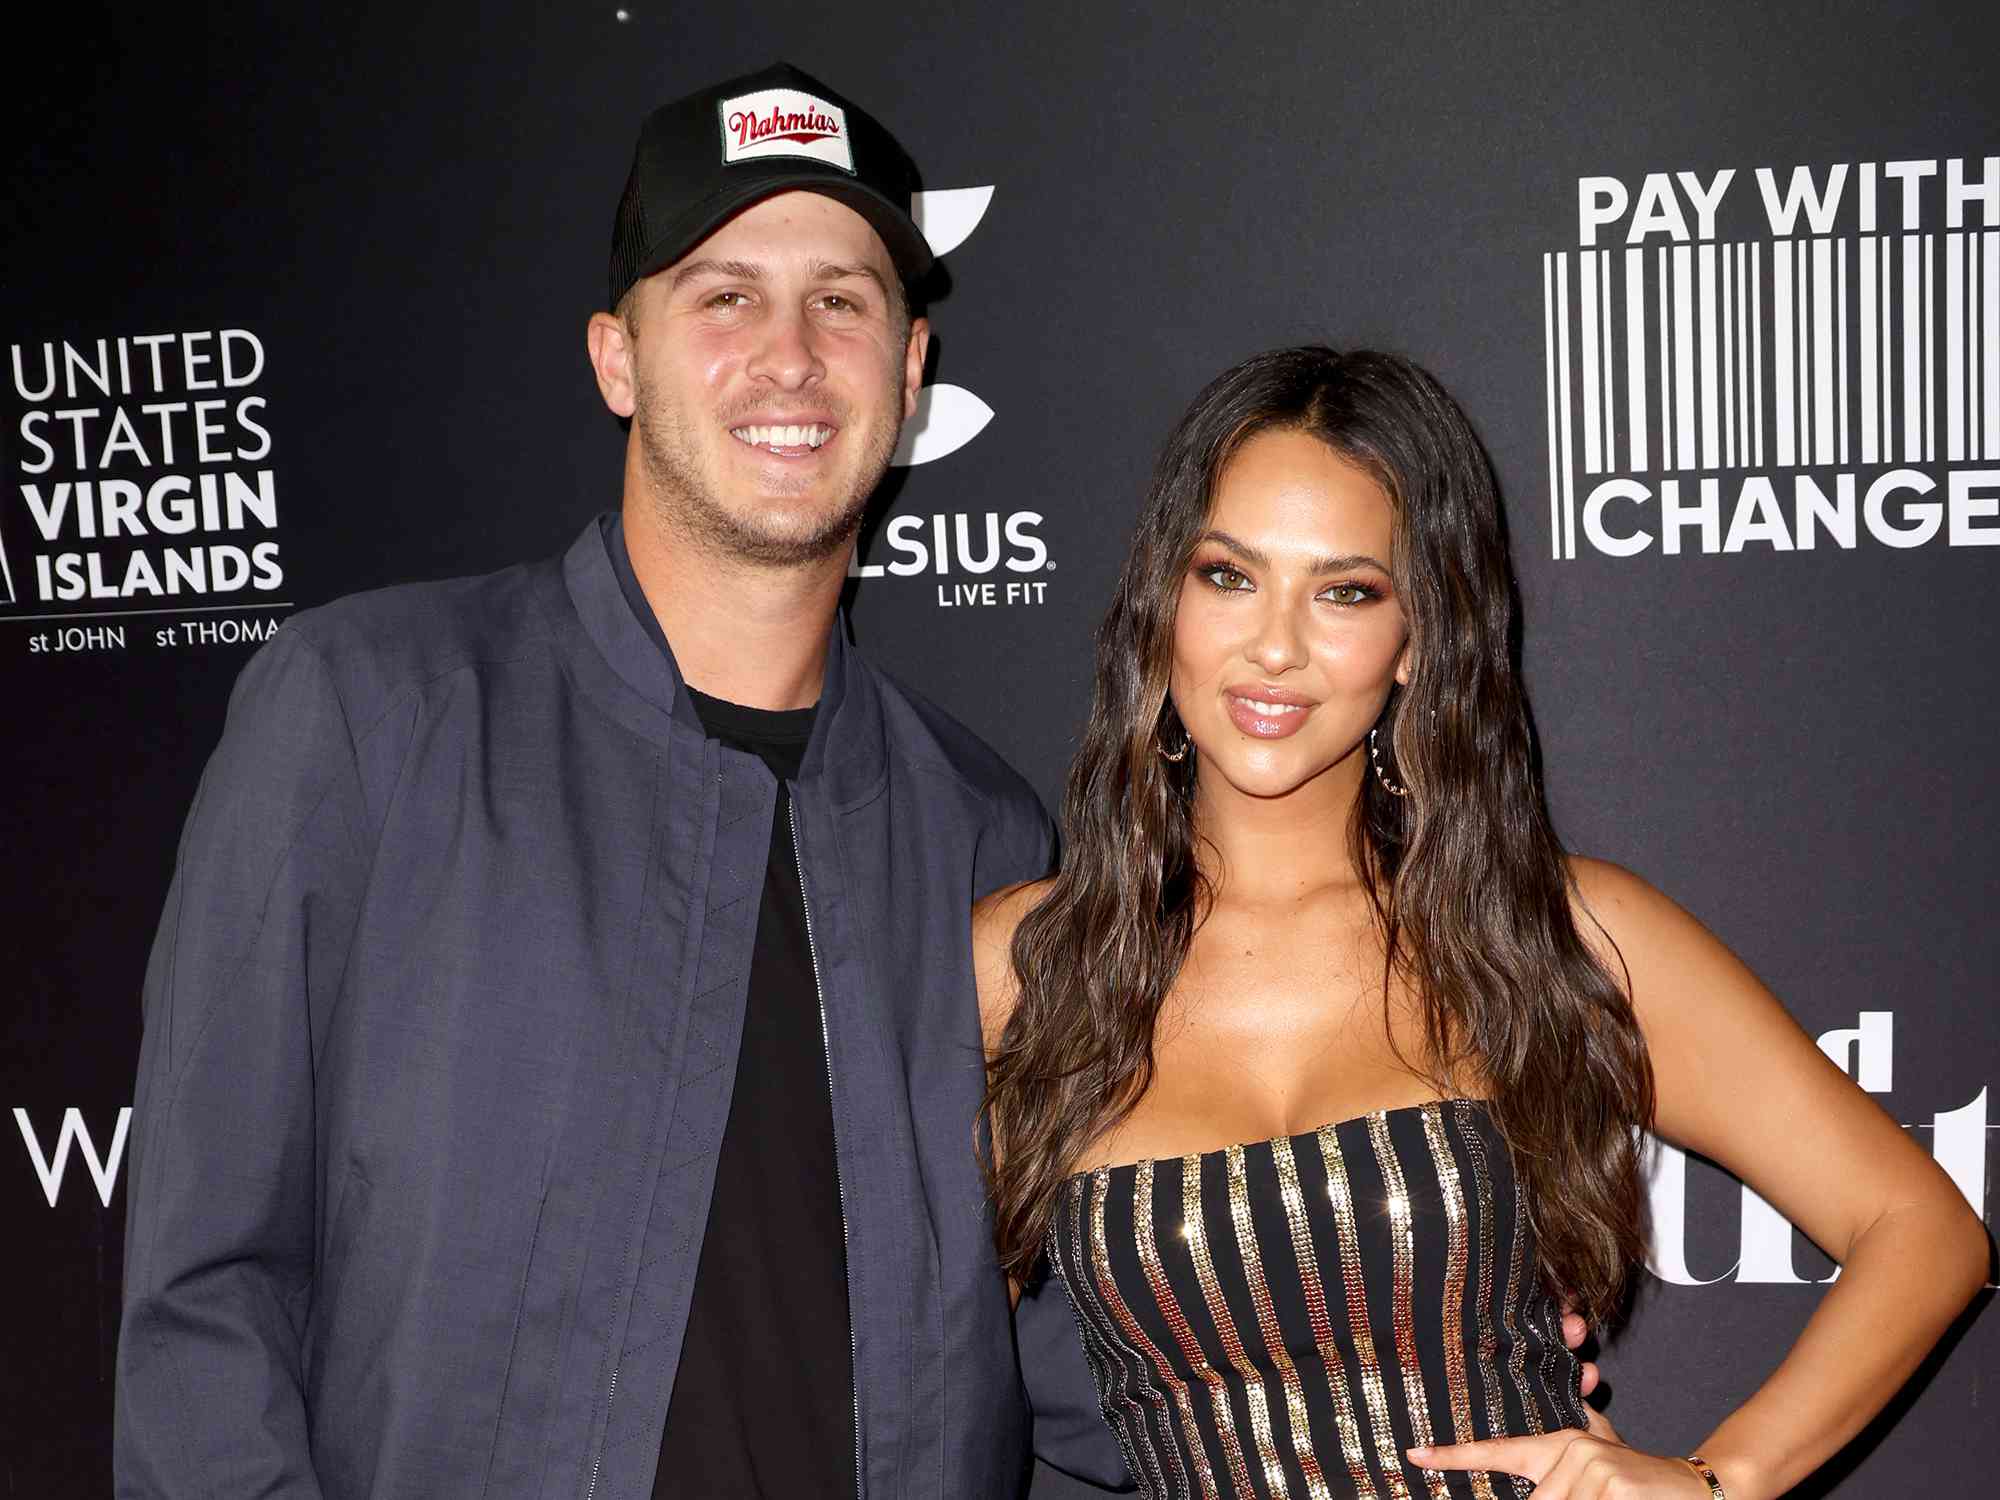 Jared Goff and Christen Harper attend as Sports Illustrated Swimsuit celebrates the launch of the 2022 Issue and Debut of Pay With Change at Hard Rock Seminole on May 21, 2022 in Hollywood, Florida